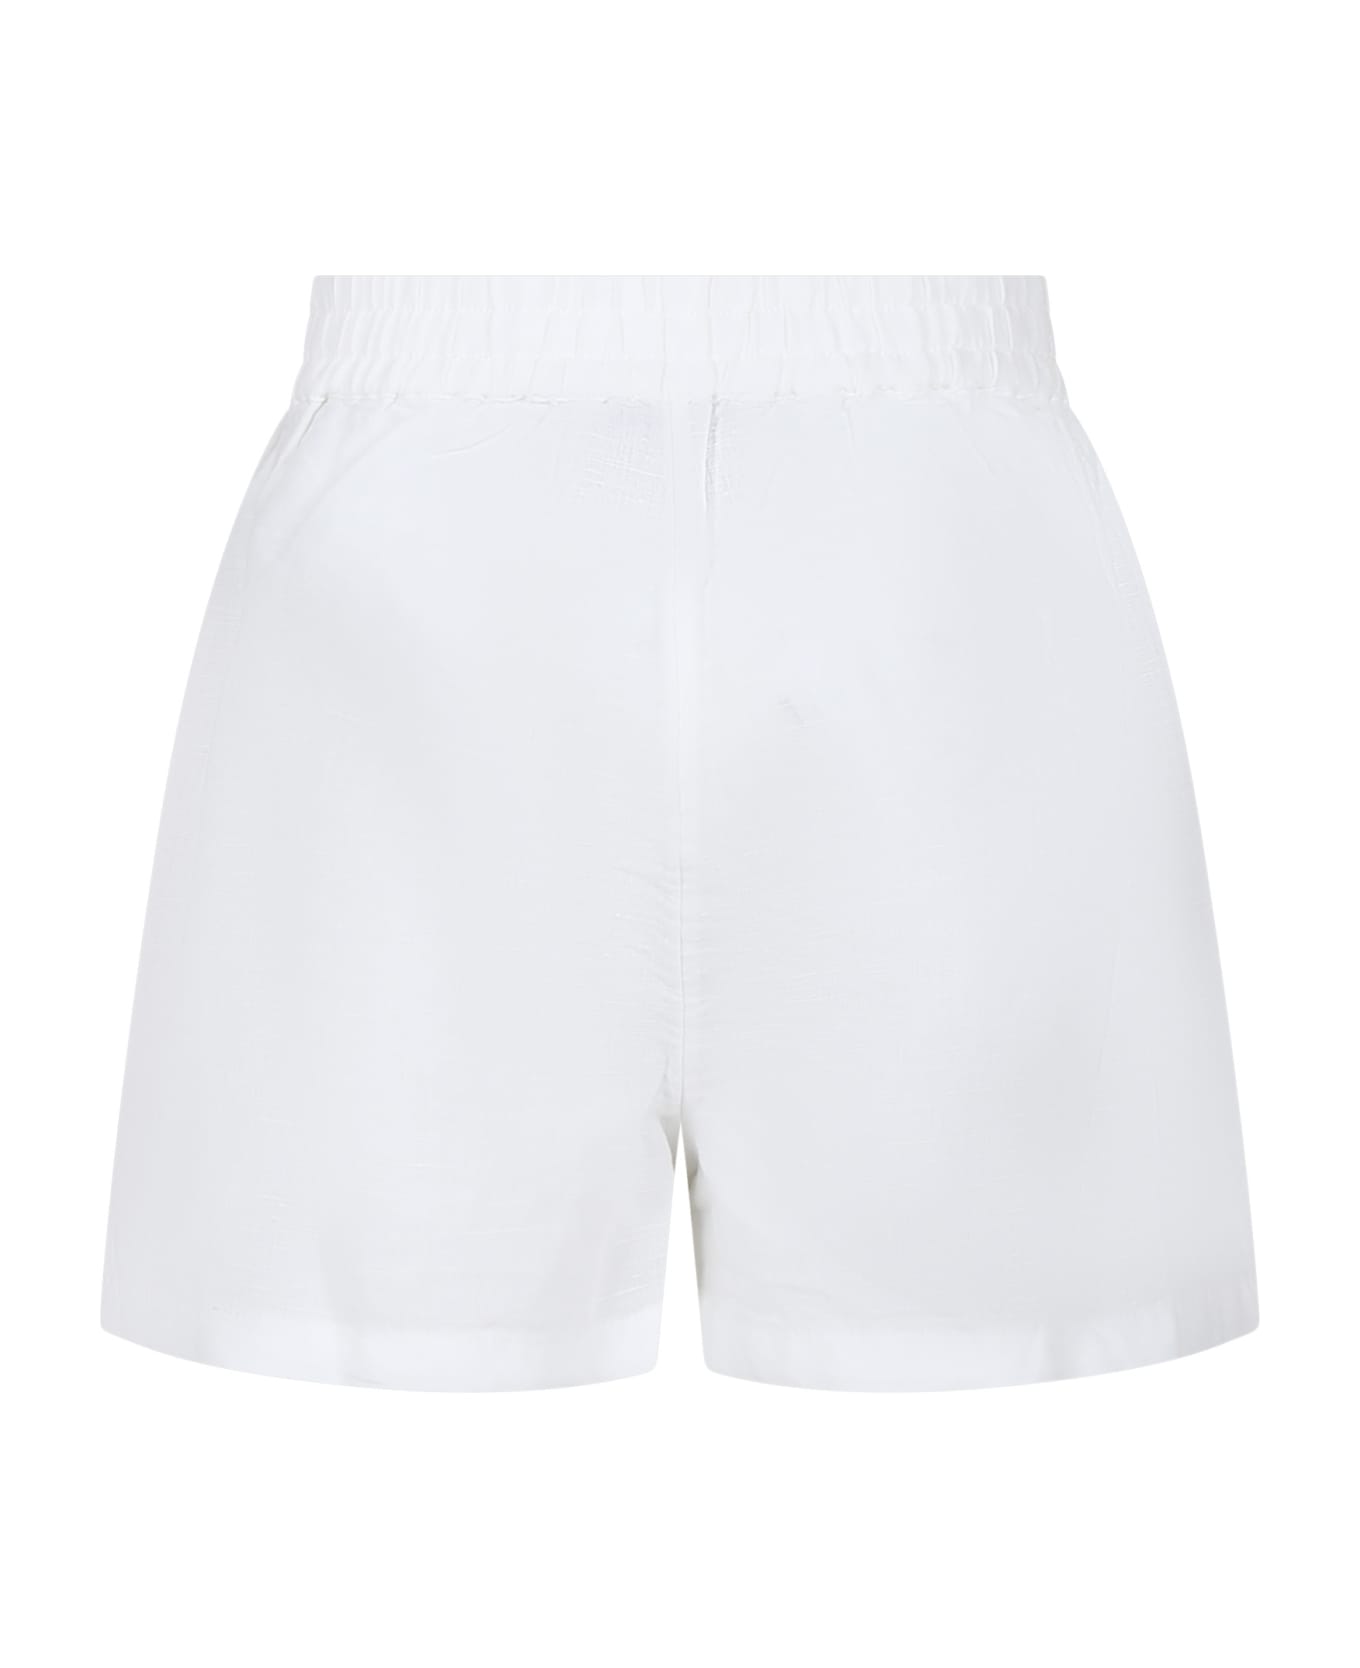 Ermanno Scervino Junior White Shorts For Girl With Embroidery - White